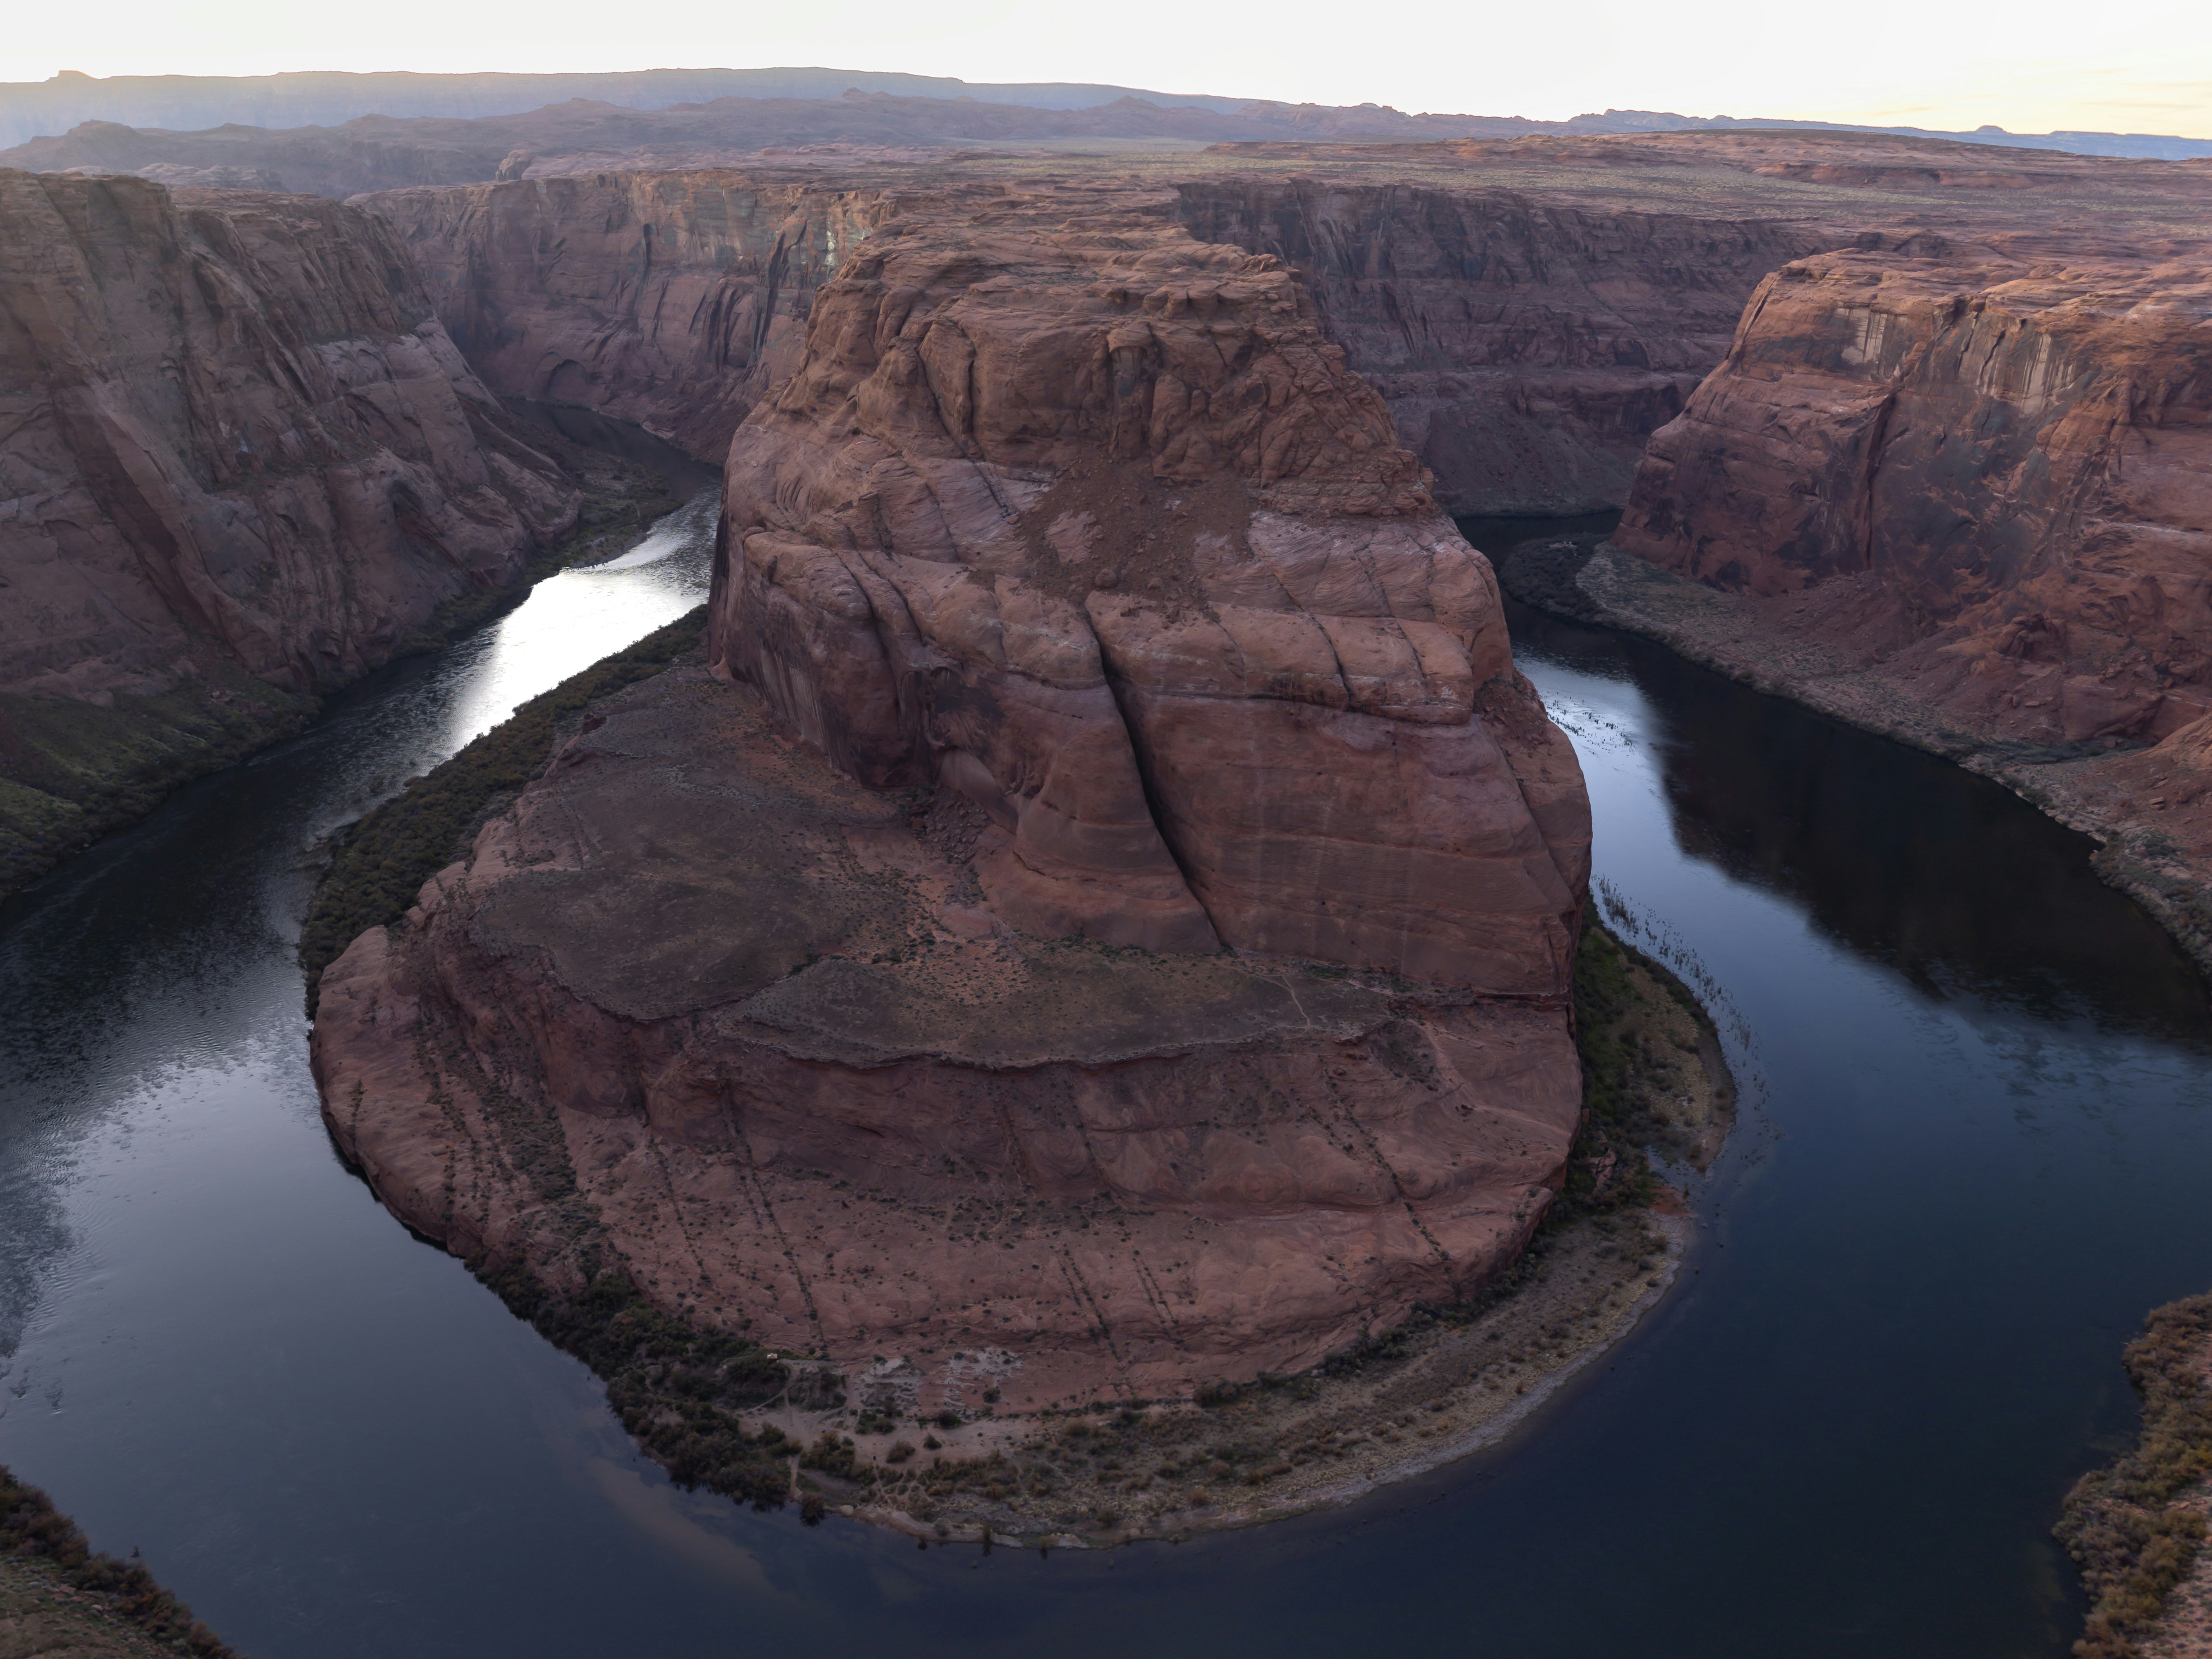 During most daylight hours, this location is packed with tourists, because everyone wants their shot of Horseshoe Bend. On this evening, I had the place to myself and was able to create a panorama of this iconic scene and eliminate the ‘wide-angle-lens-distortion’ seen in many images on the internet.